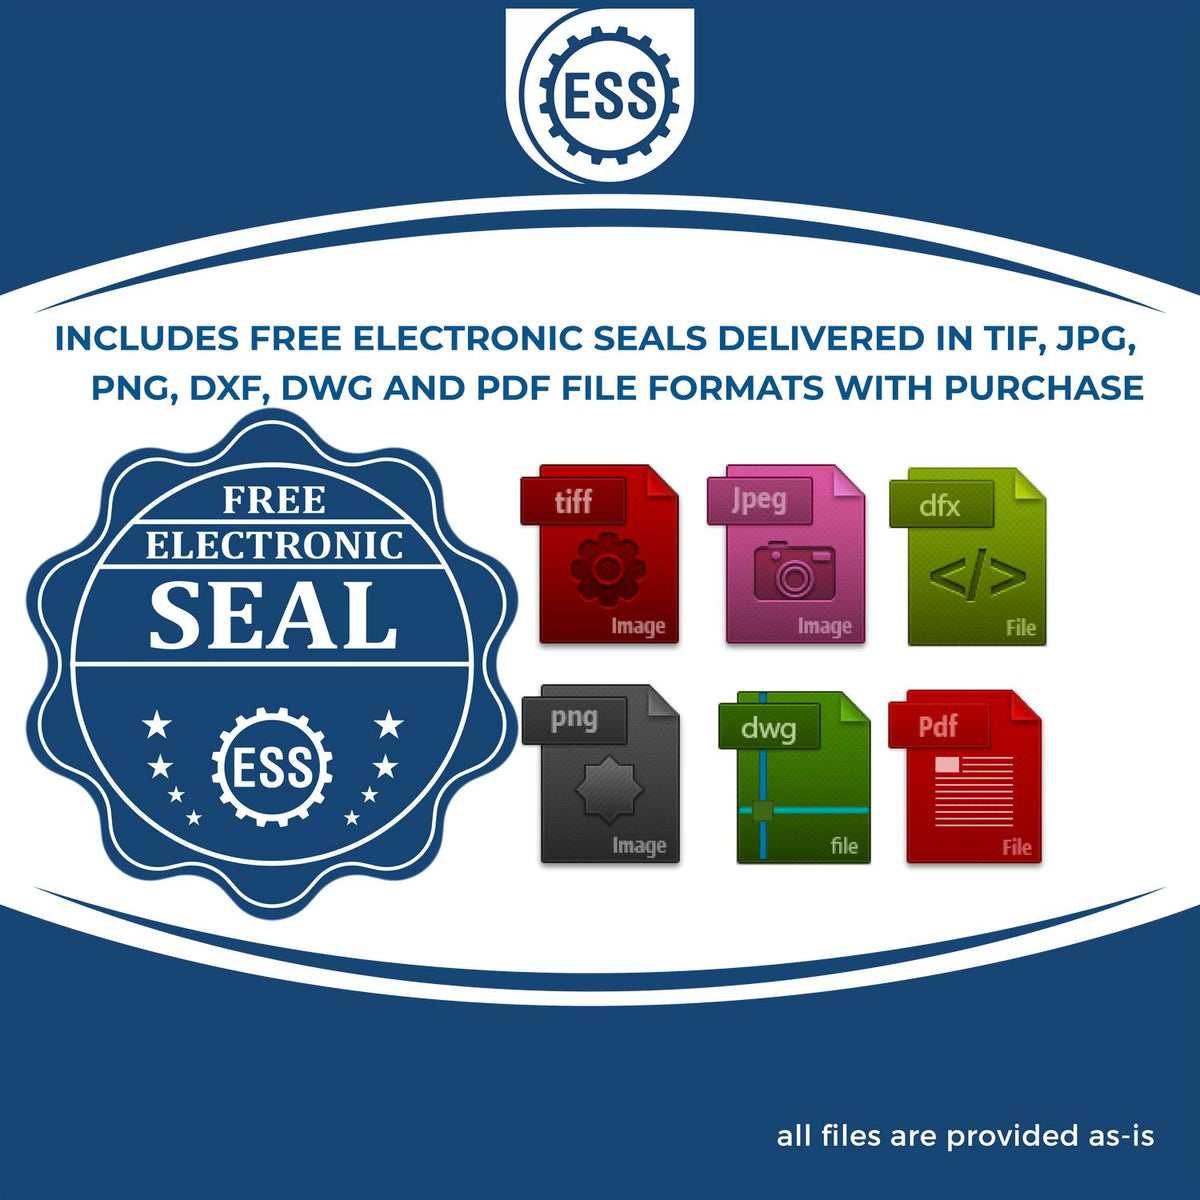 An infographic for the free electronic seal for the New Jersey Engineer Desk Seal illustrating the different file type icons such as DXF, DWG, TIF, JPG and PNG.